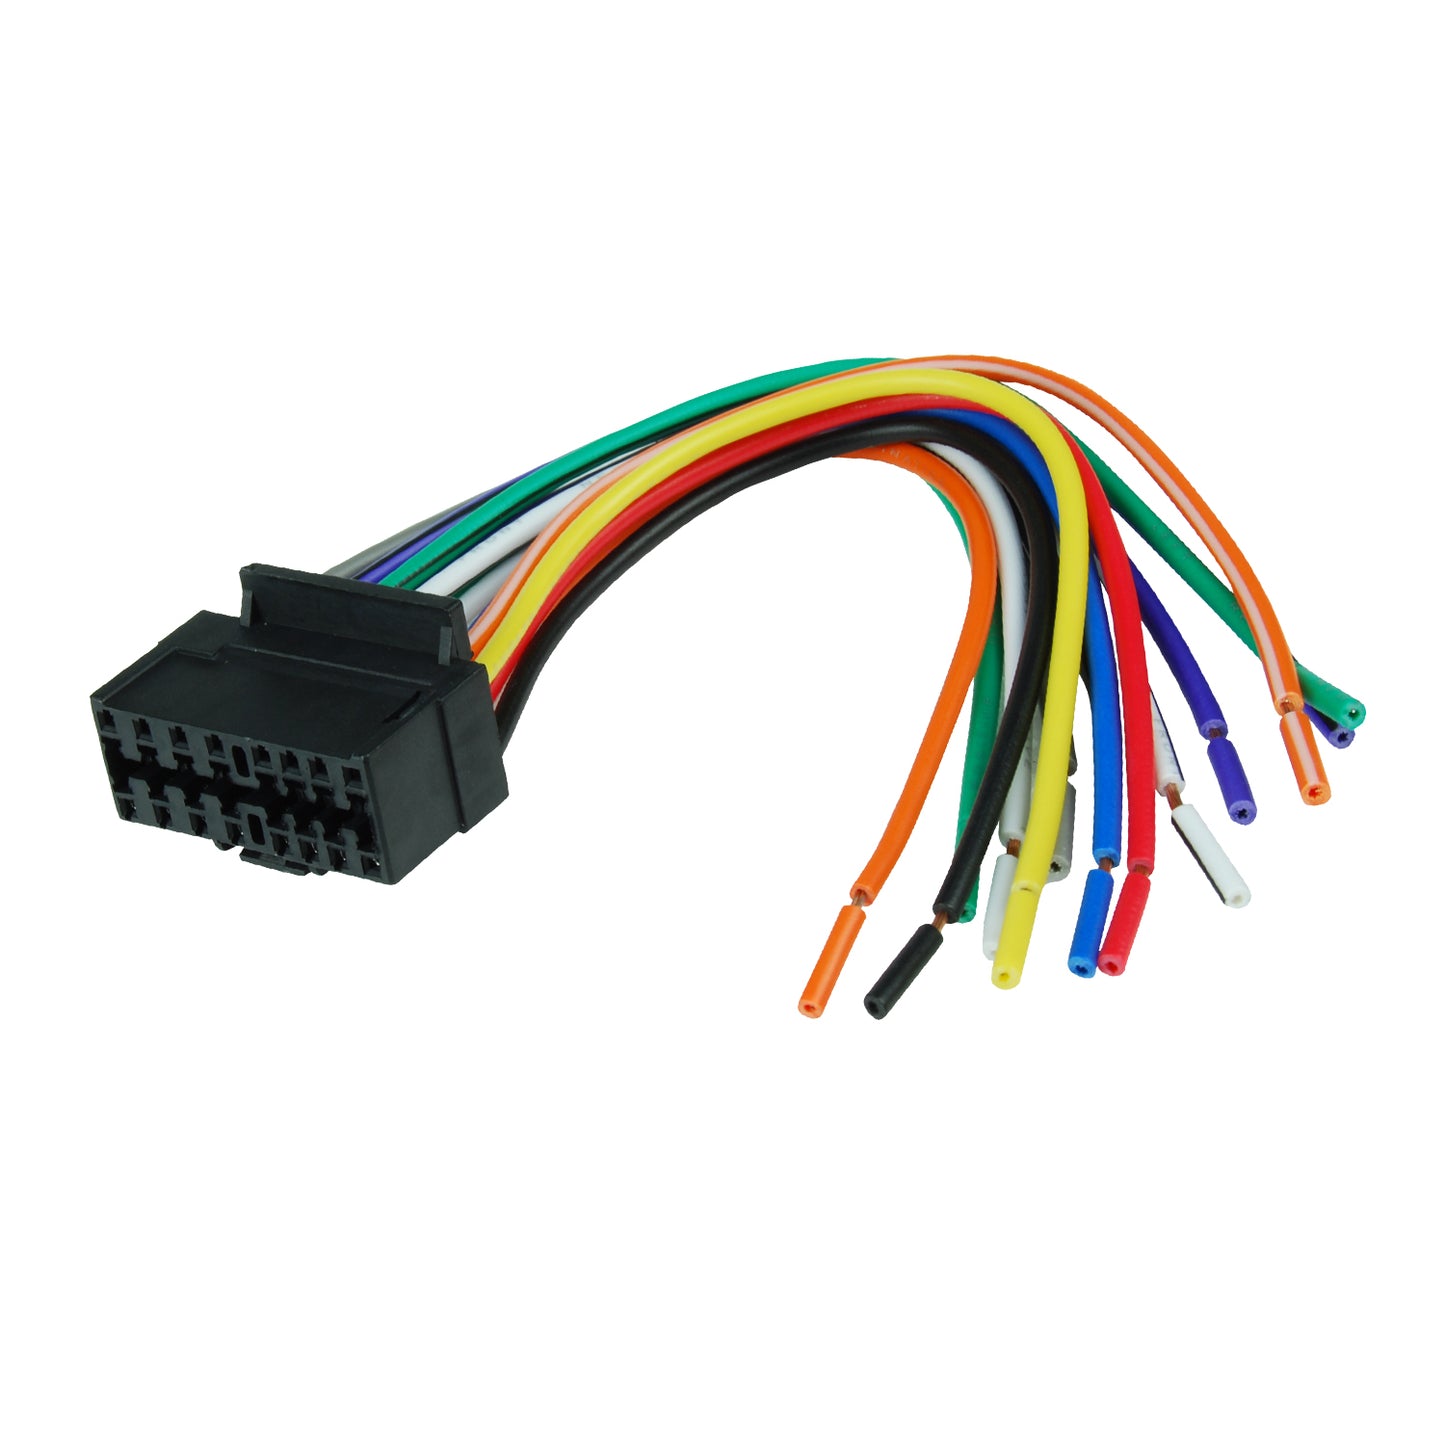 WH-JVC16P - Wiring Harness for JVC